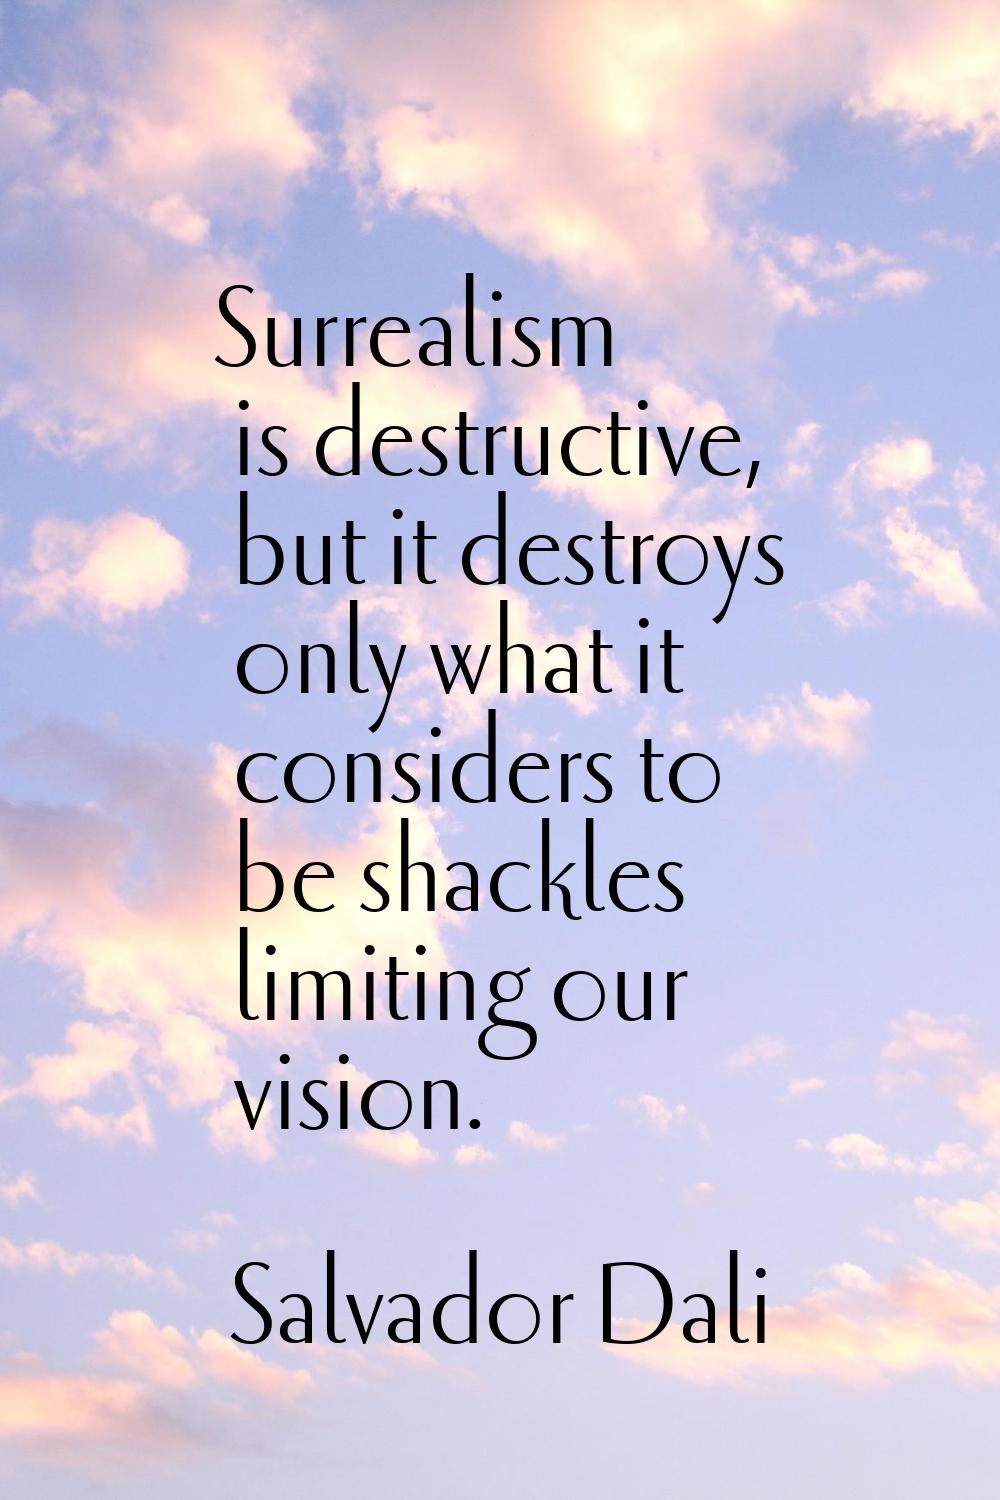 Surrealism is destructive, but it destroys only what it considers to be shackles limiting our visio